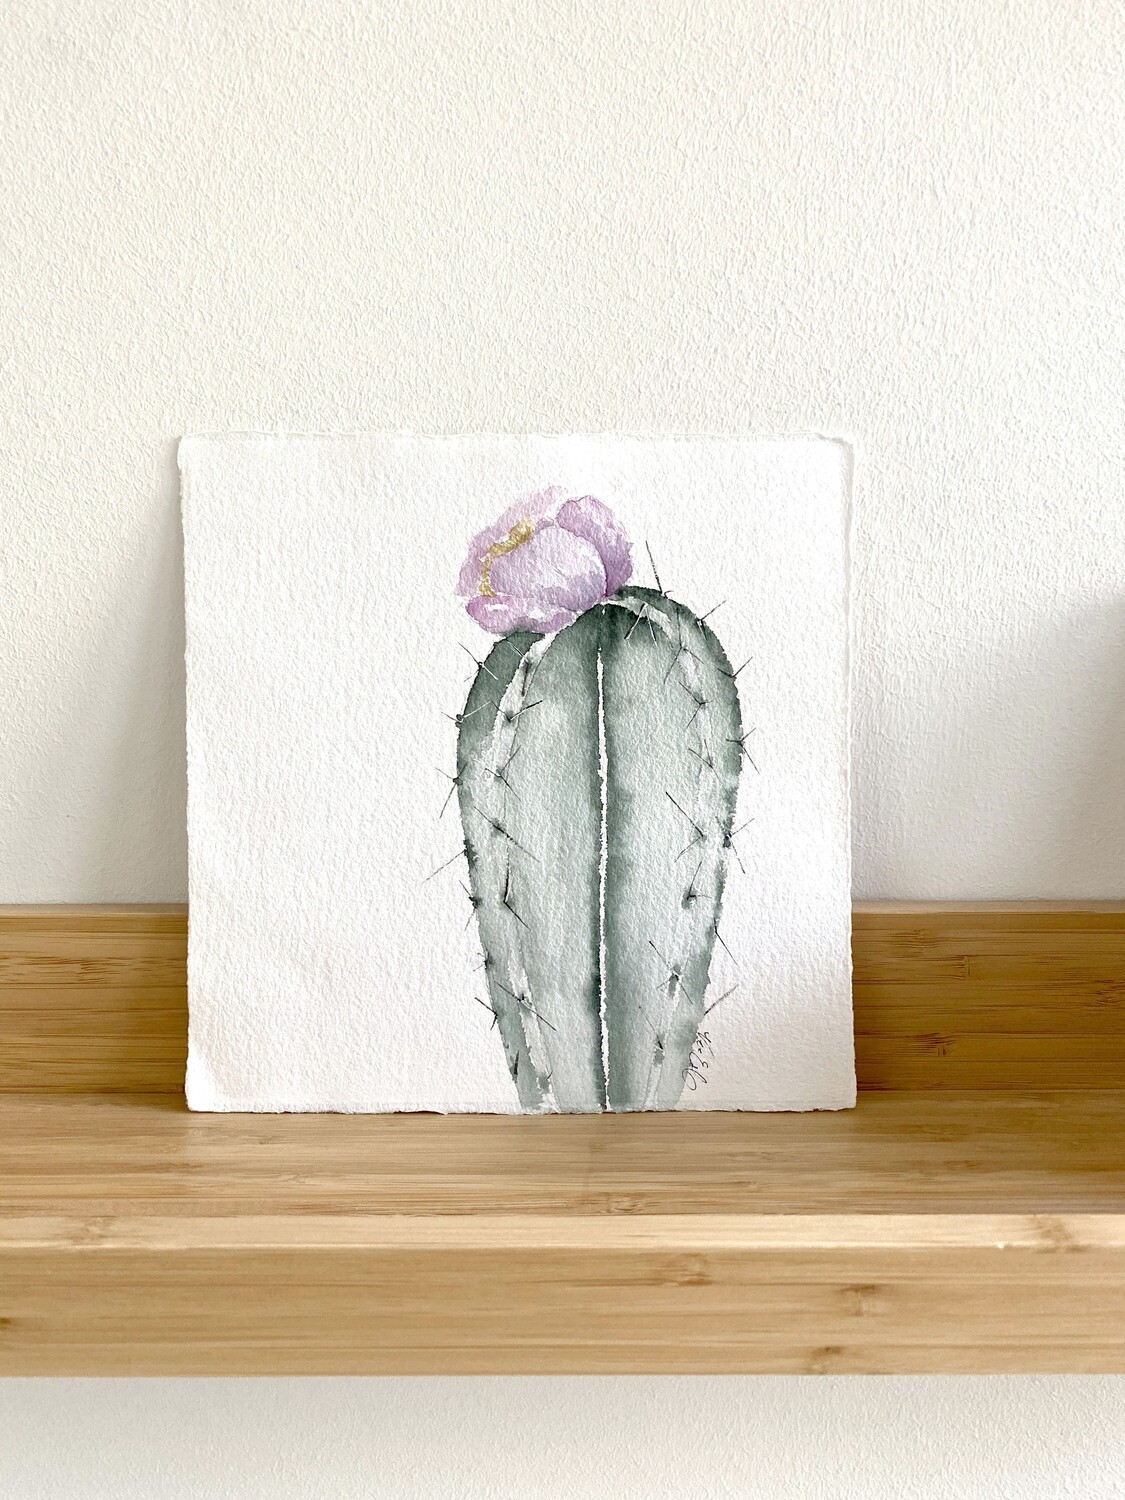 Cactus with a Purple Bloom